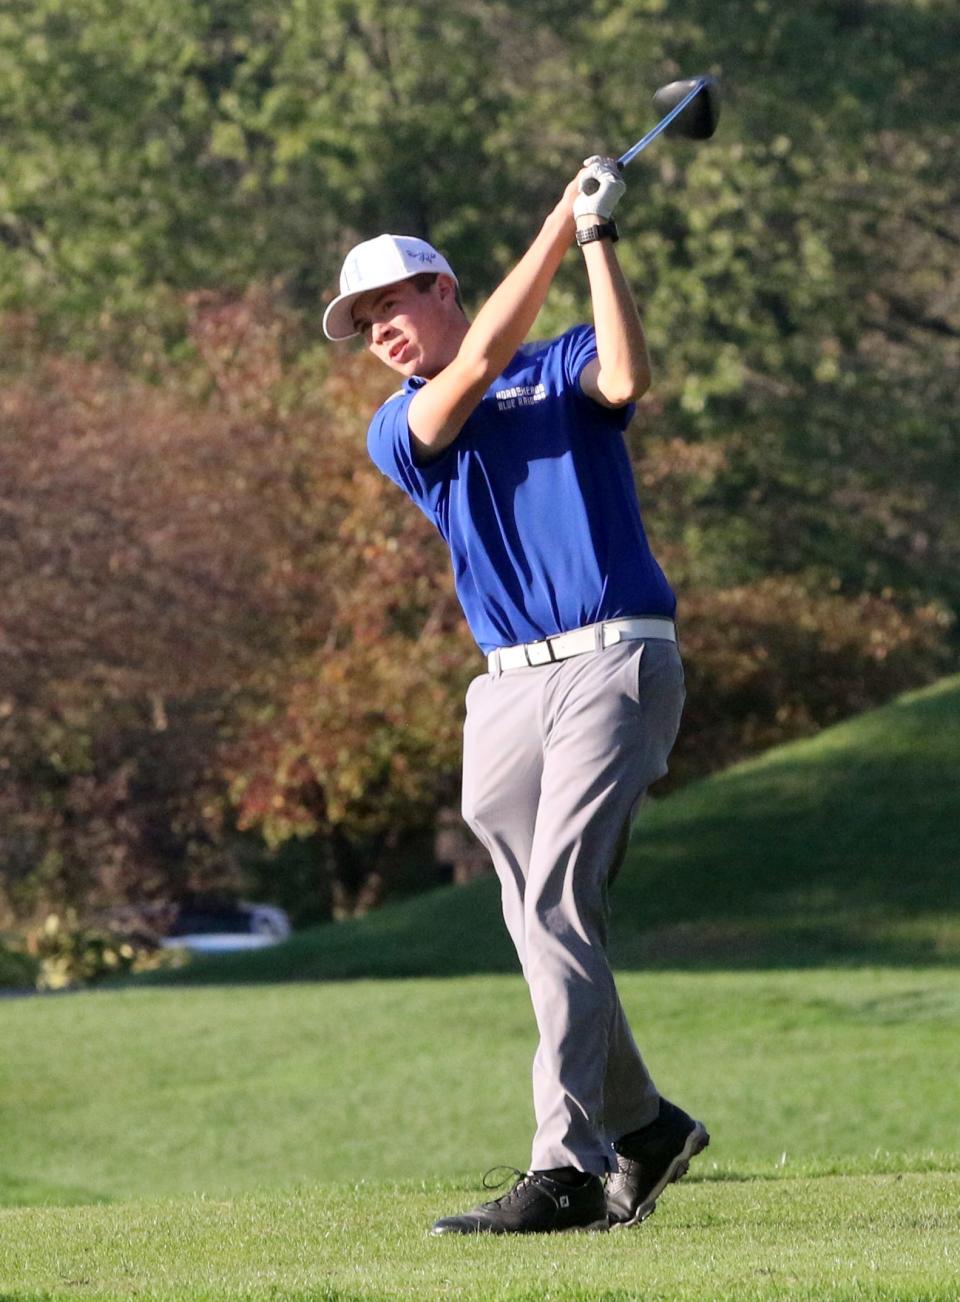 Matt Printup of Horseheads tees off on the sixth hole during a win over Corning on Oct. 8, 2019 at Willowcreek Golf Club in Big Flats.